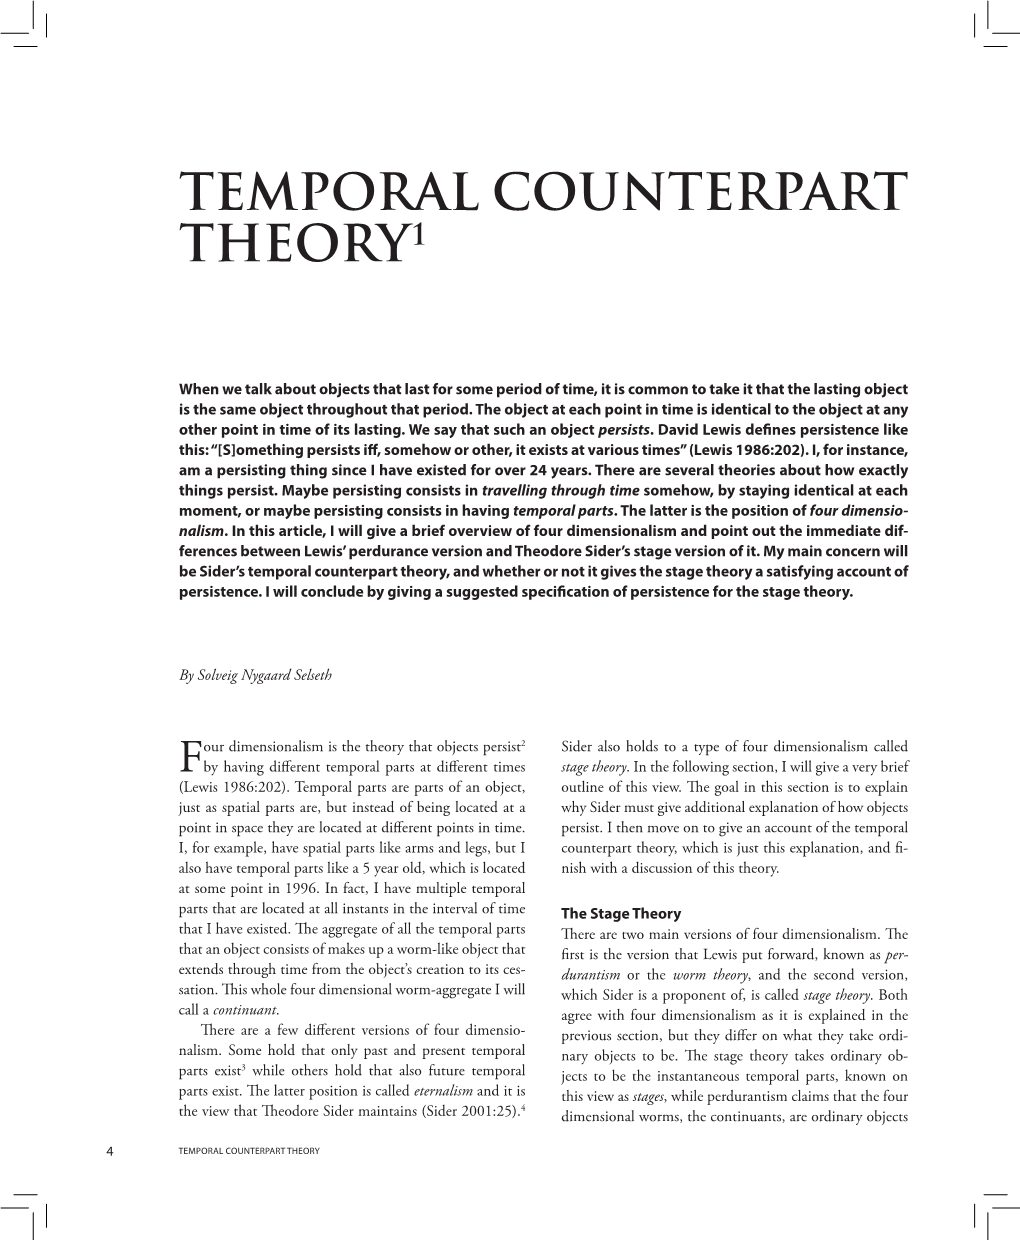 Temporal Counterpart Theory1